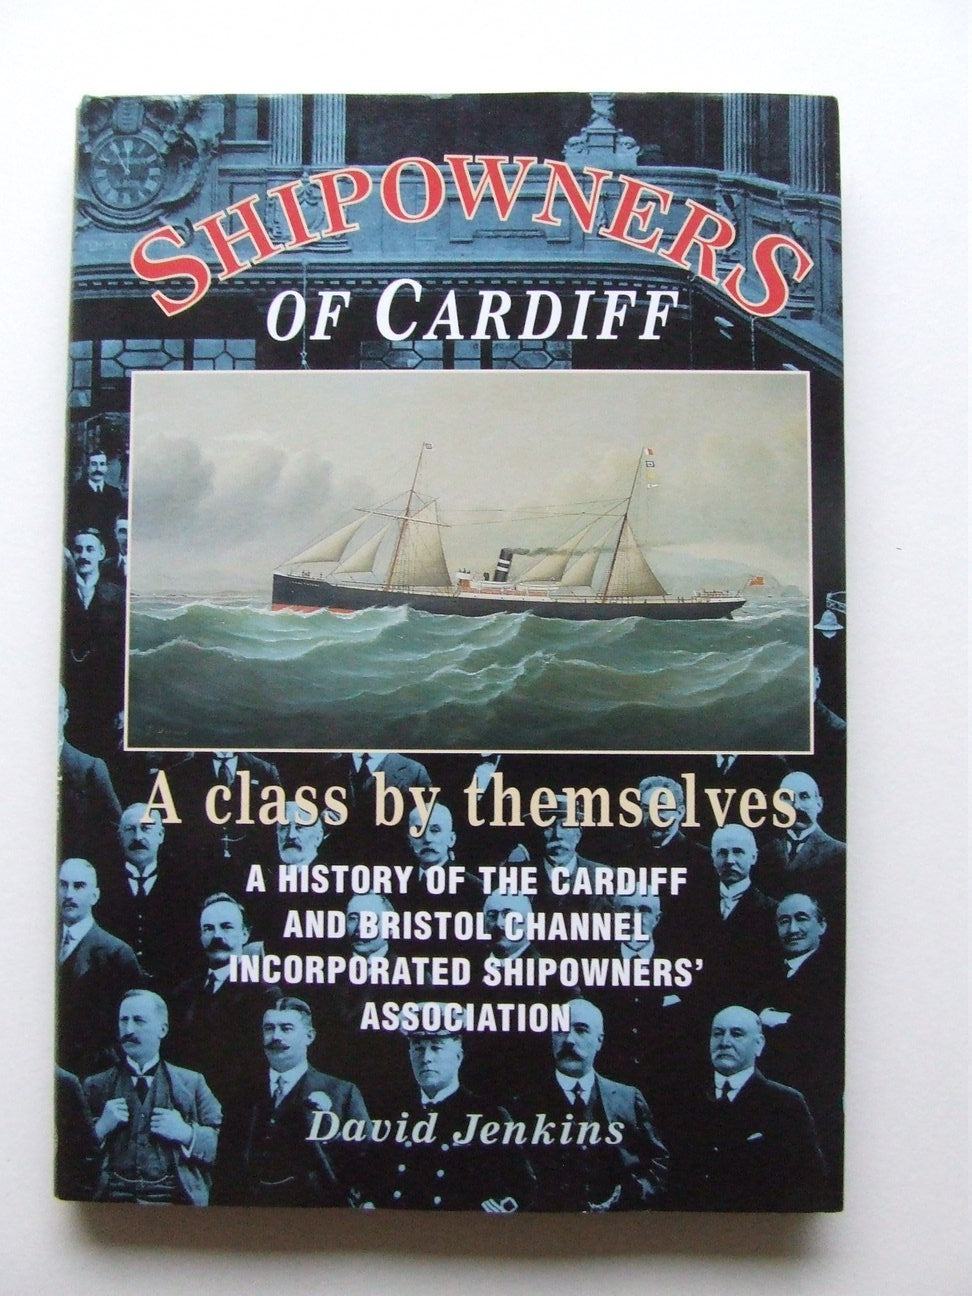 Shipowners of Cardiff, a class by themselves